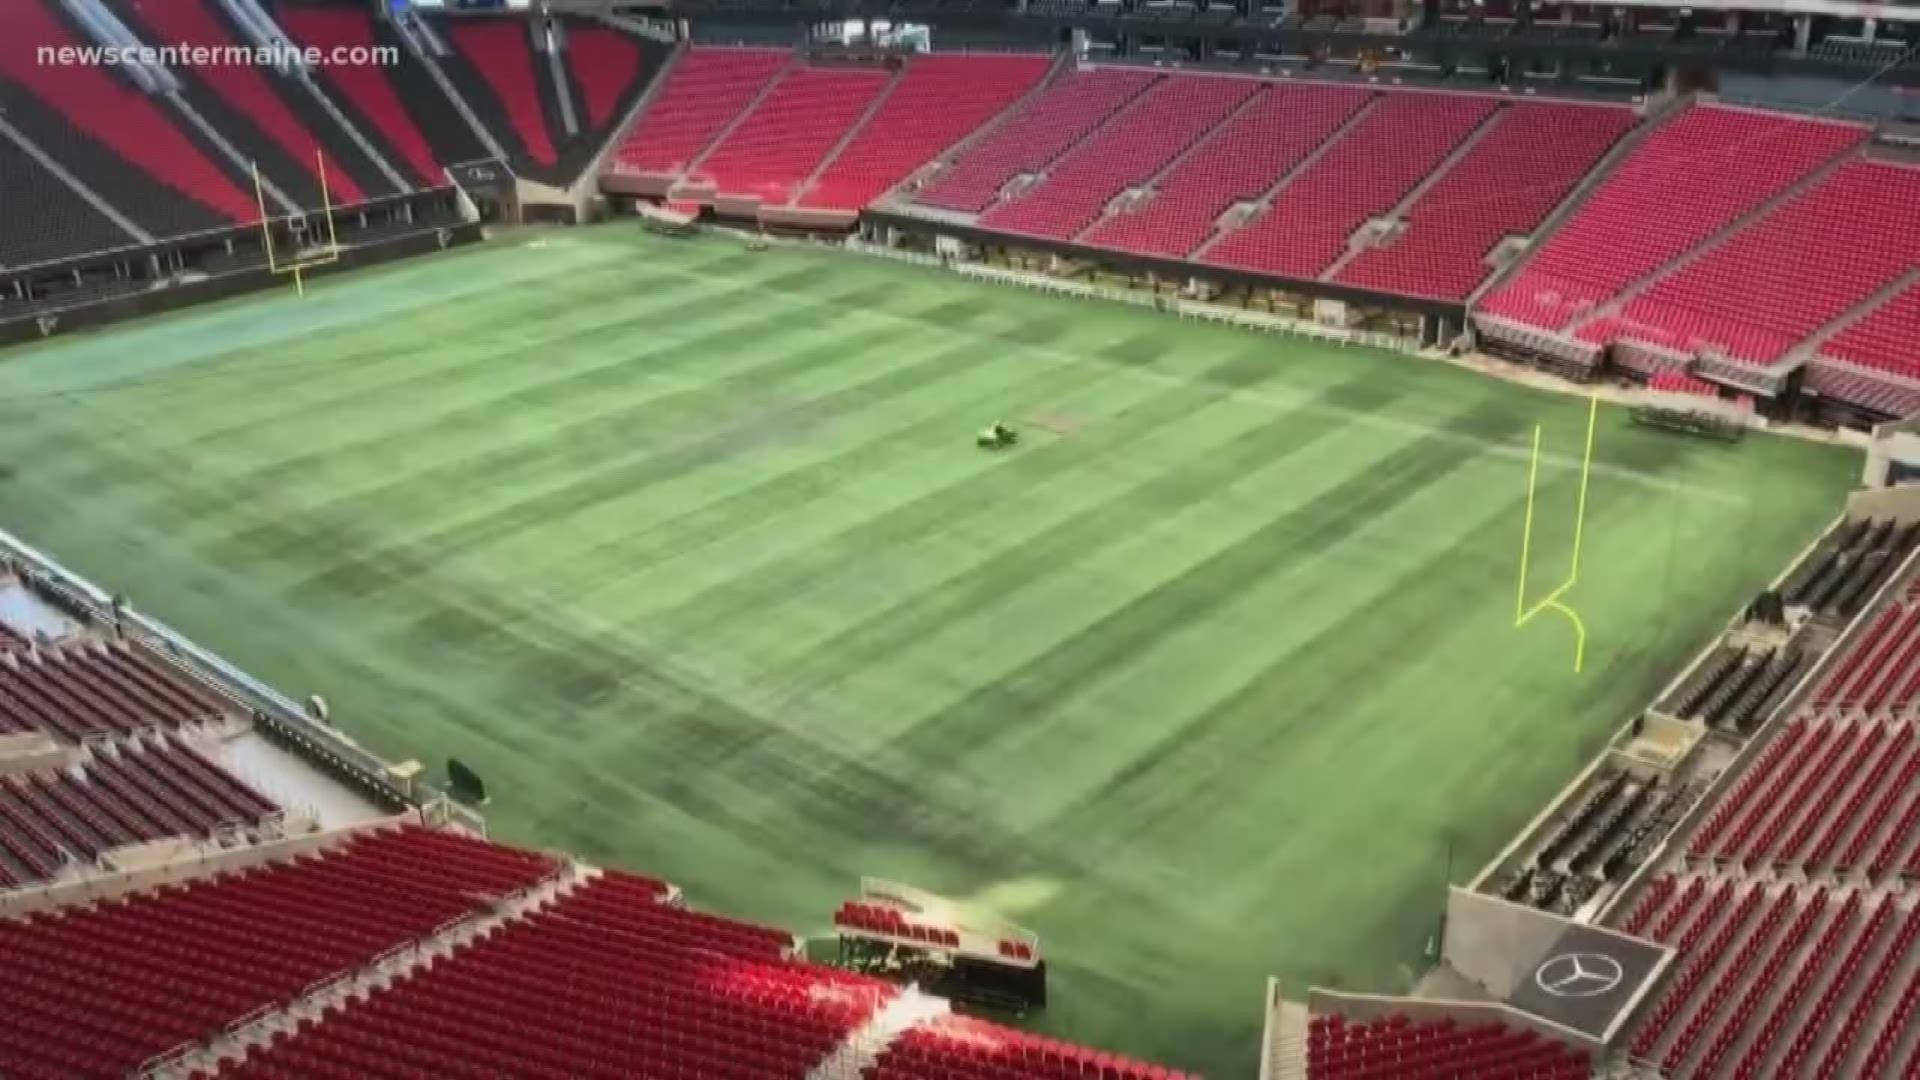 A Newcastle man helped prepare the playing surface at the stadium before the Patriots and the Rams face off in Super Bowl LIII.